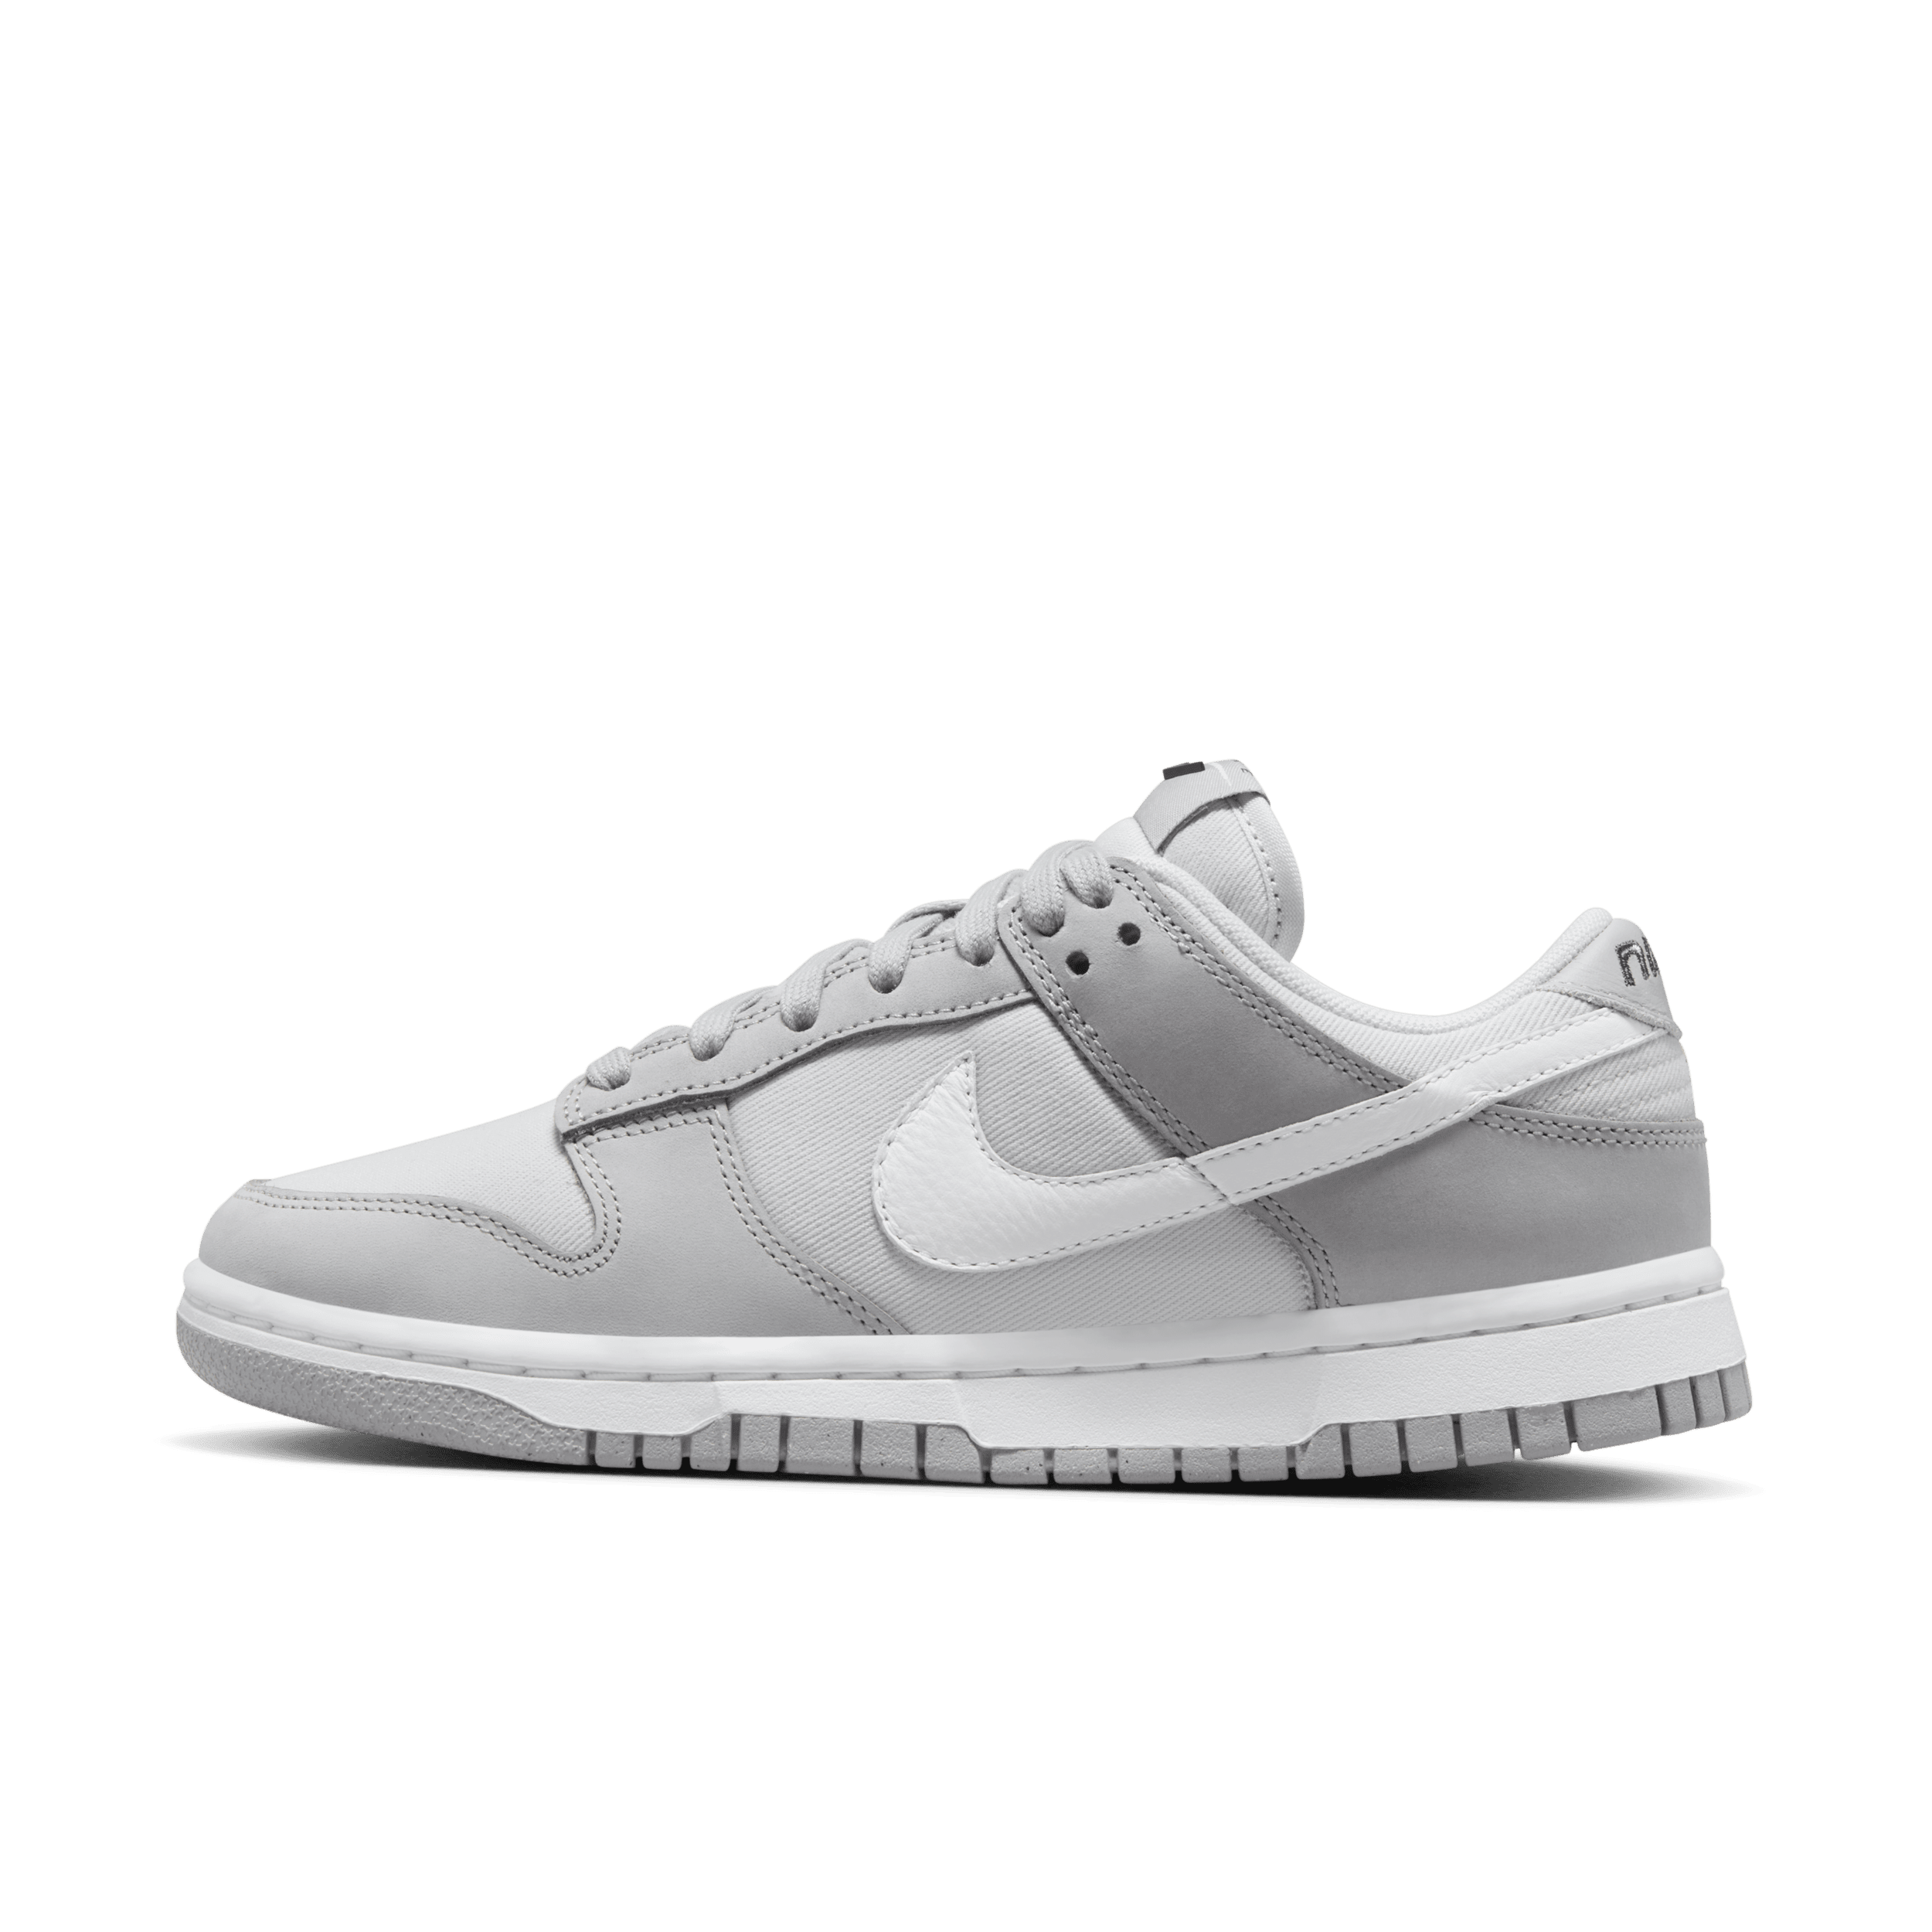 Chaussure Nike Dunk Low LX NBHD pour femme - Gris